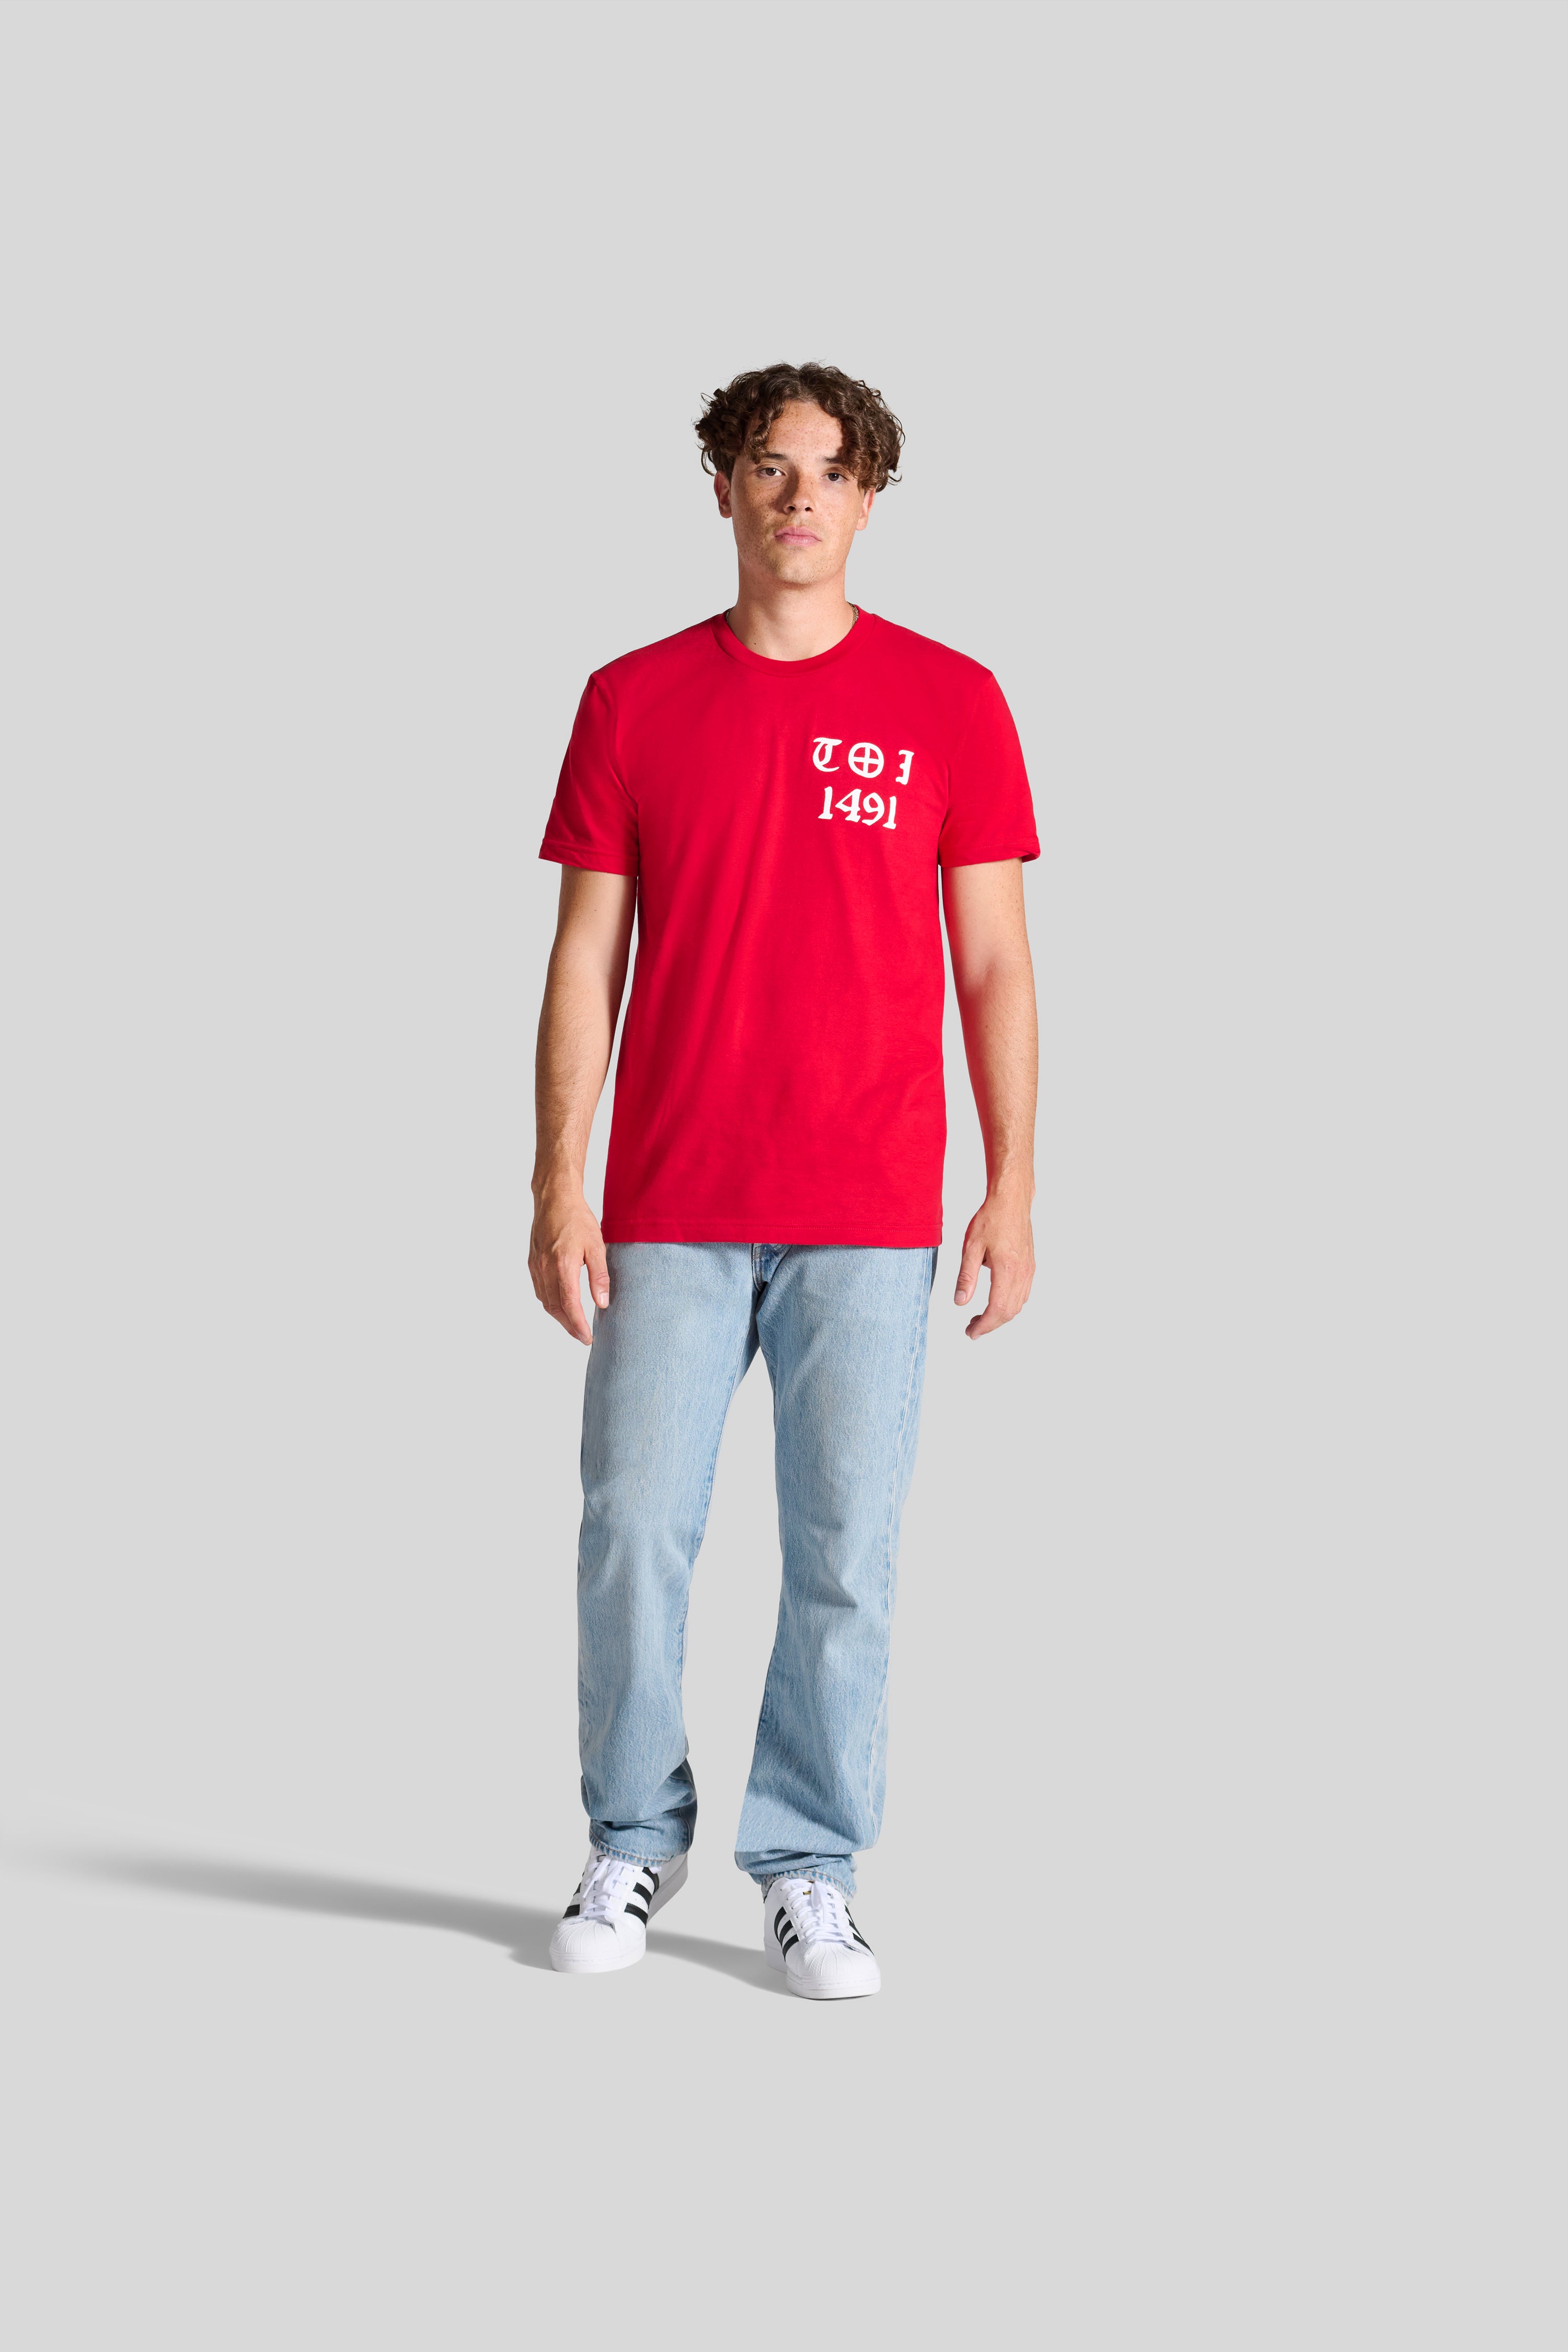 Title Shot Tee - Red